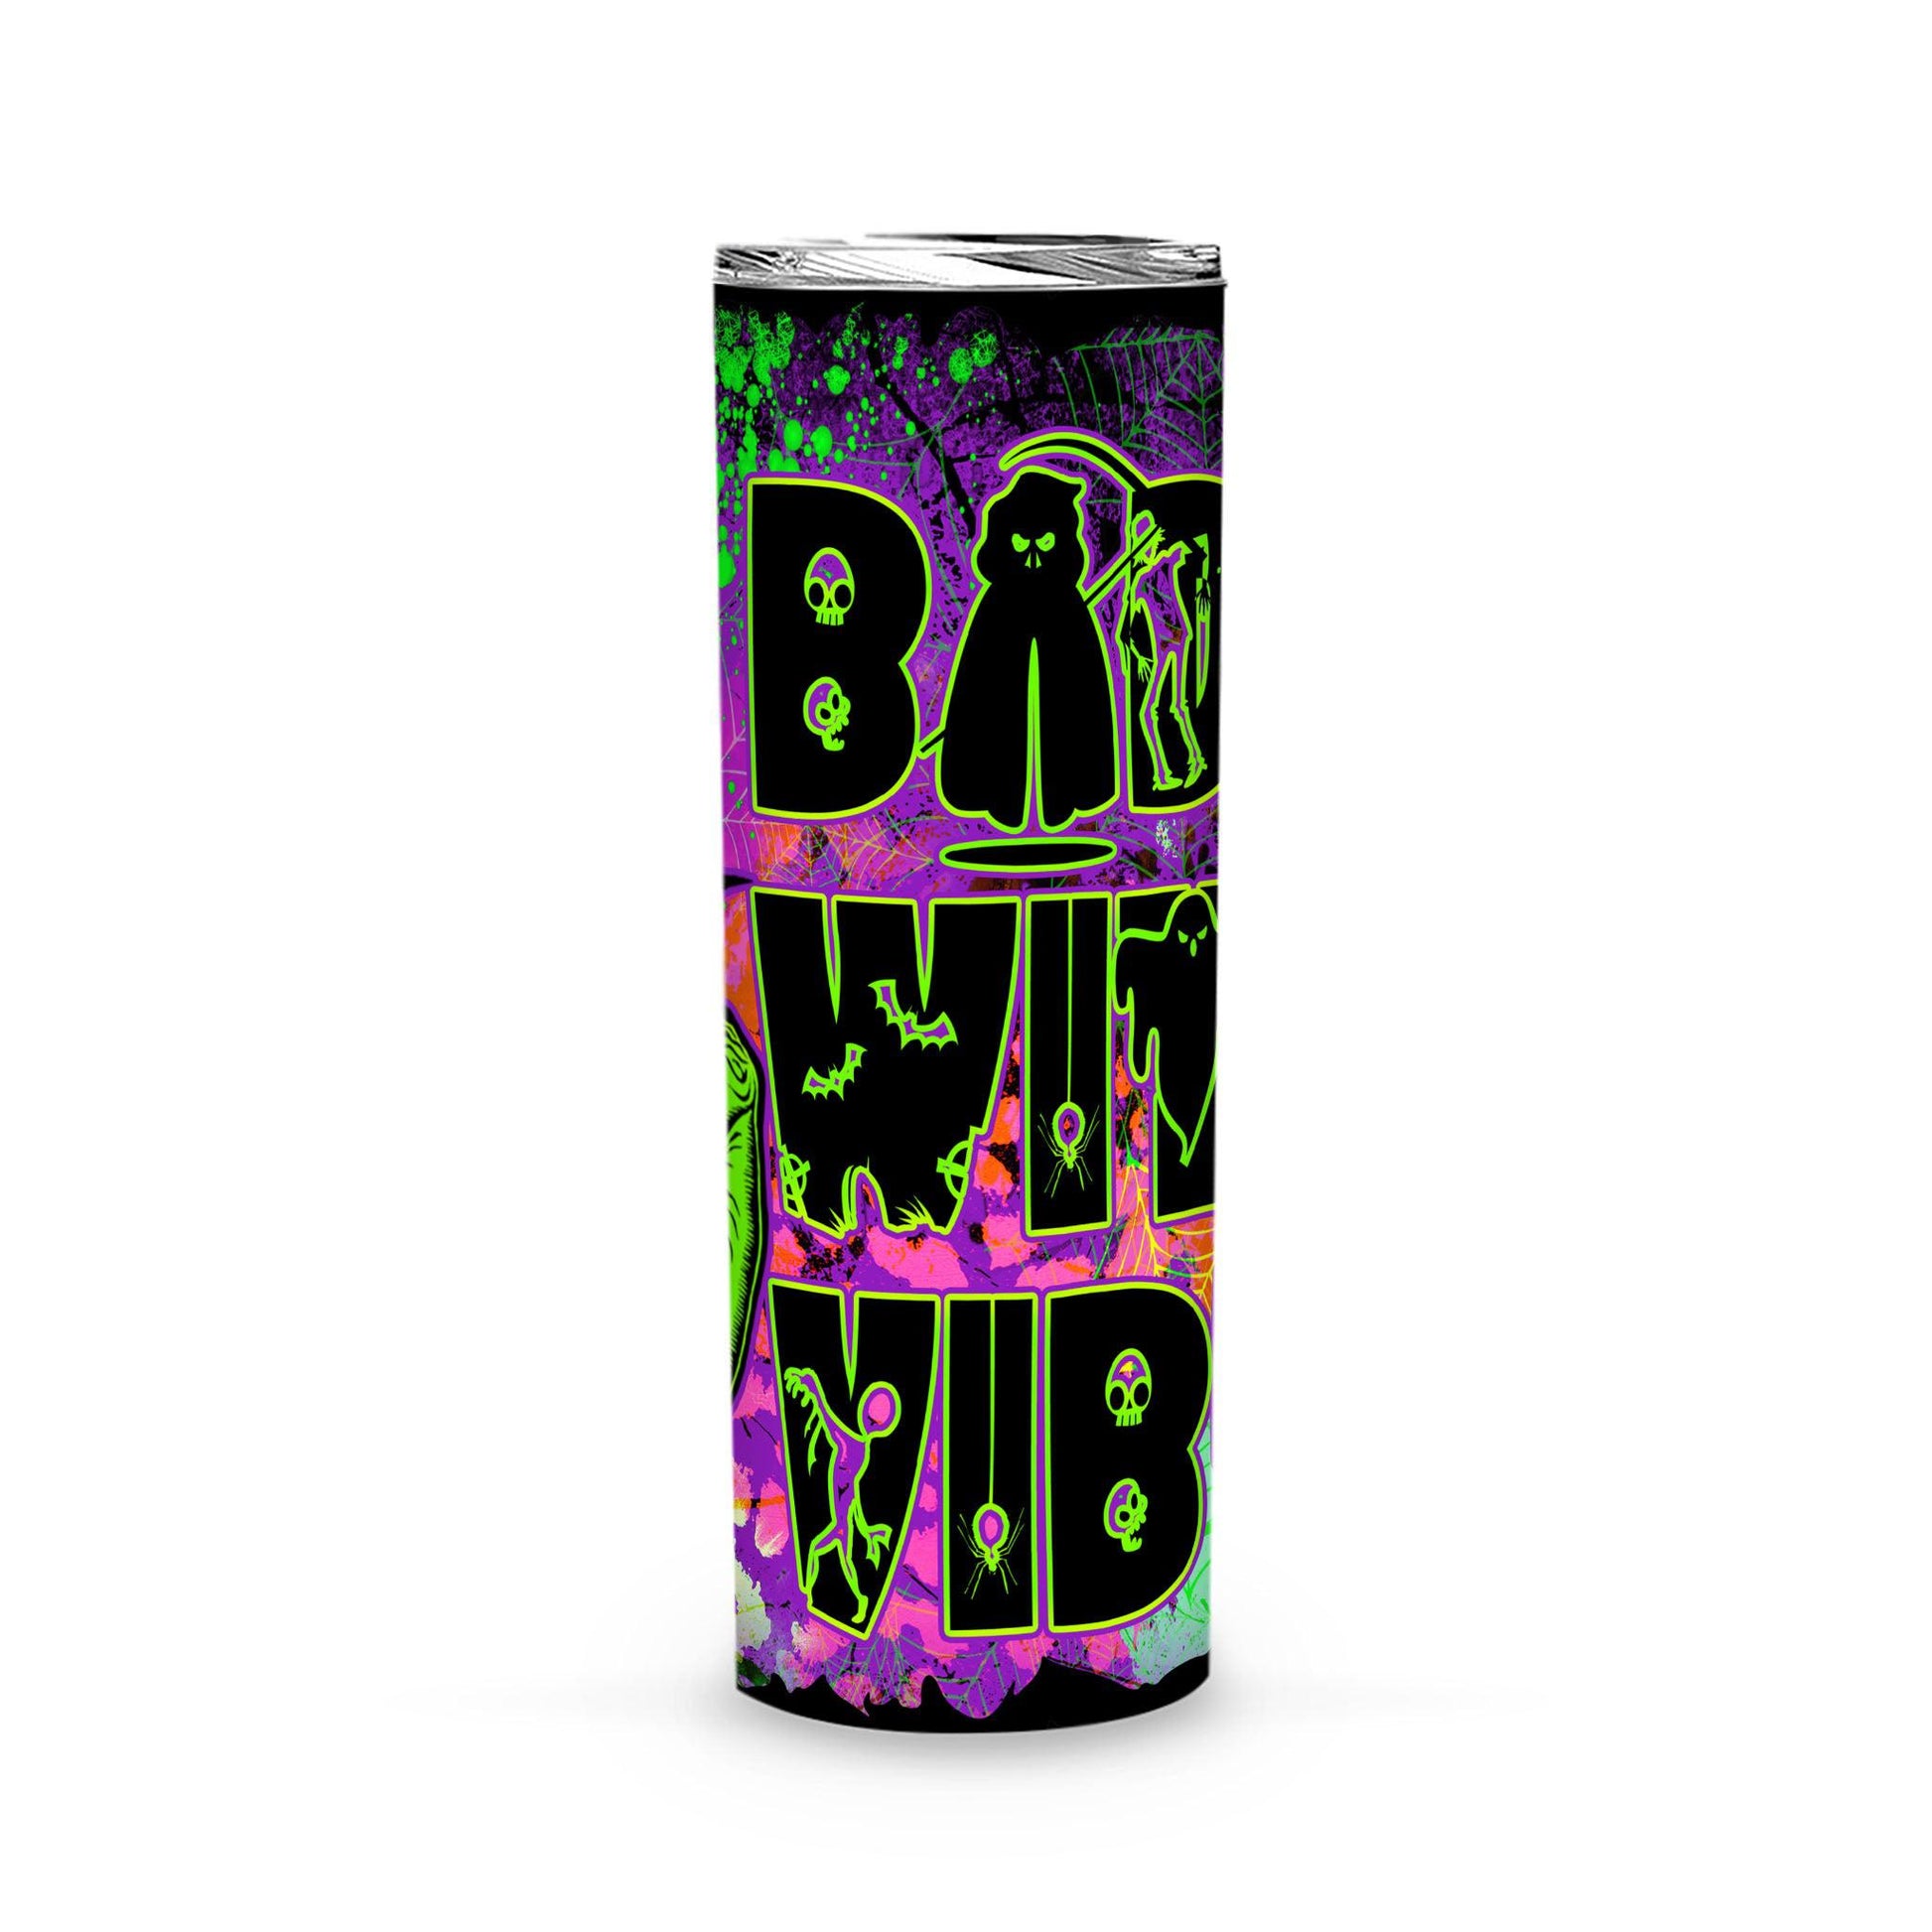 Bad witch vibes Halloween Tumbler - Witch Tumbler-MoonChildWorld